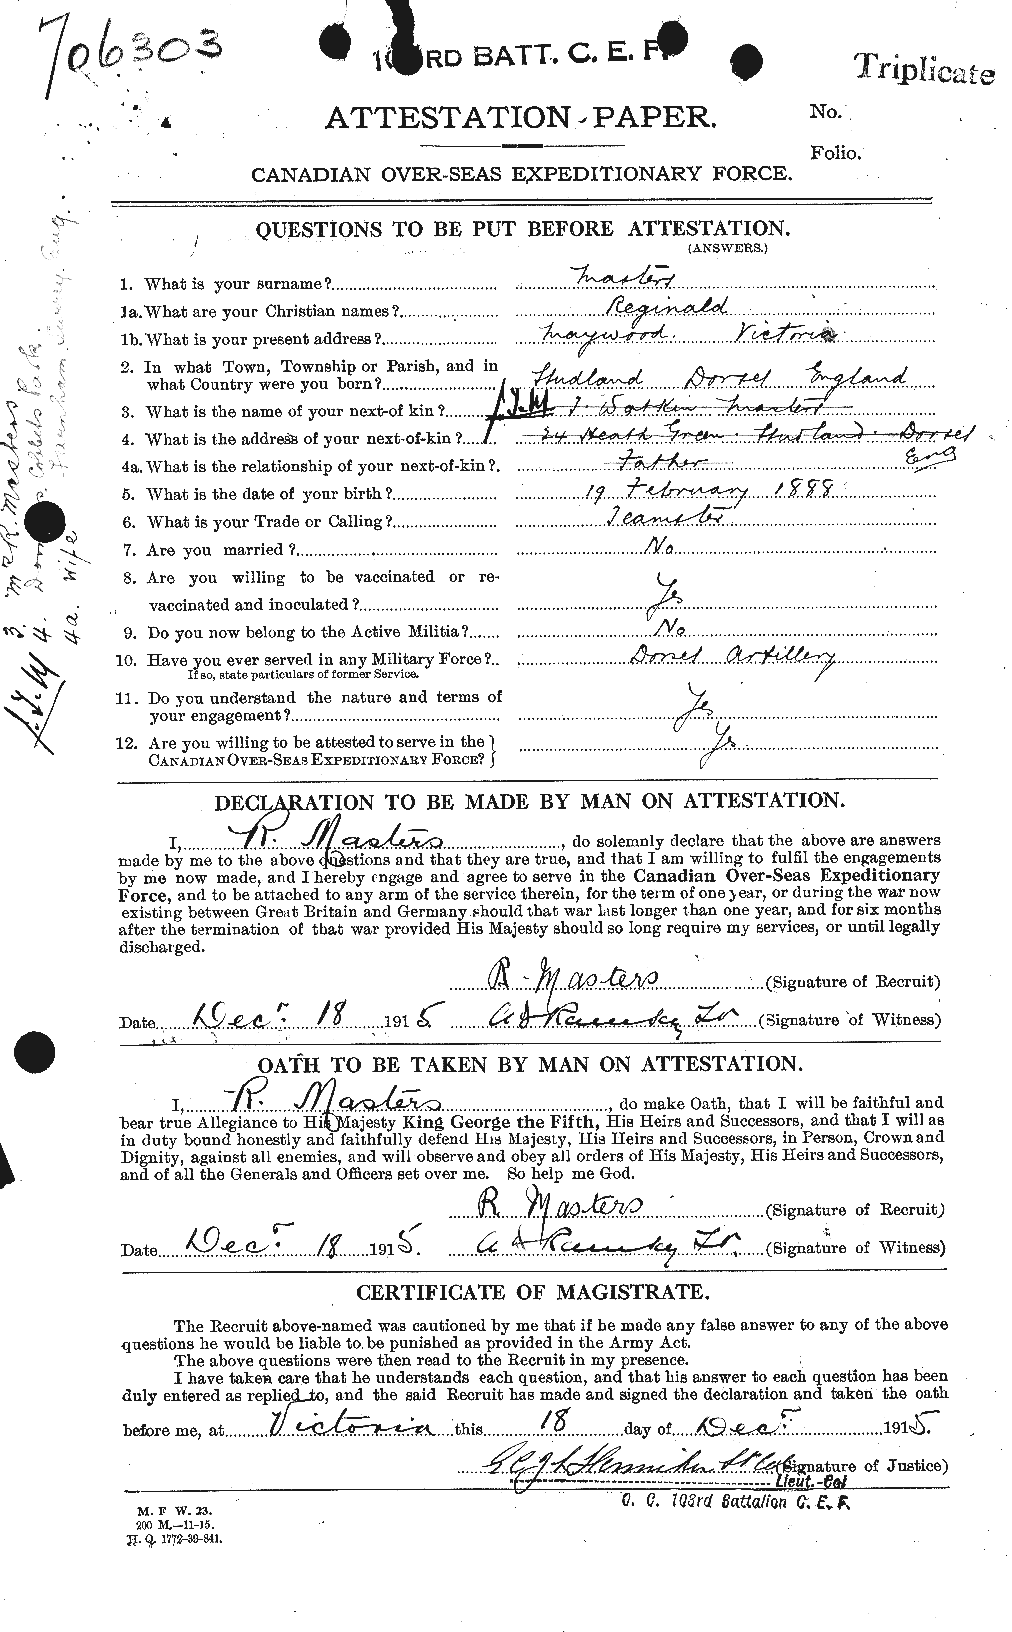 Personnel Records of the First World War - CEF 488454a